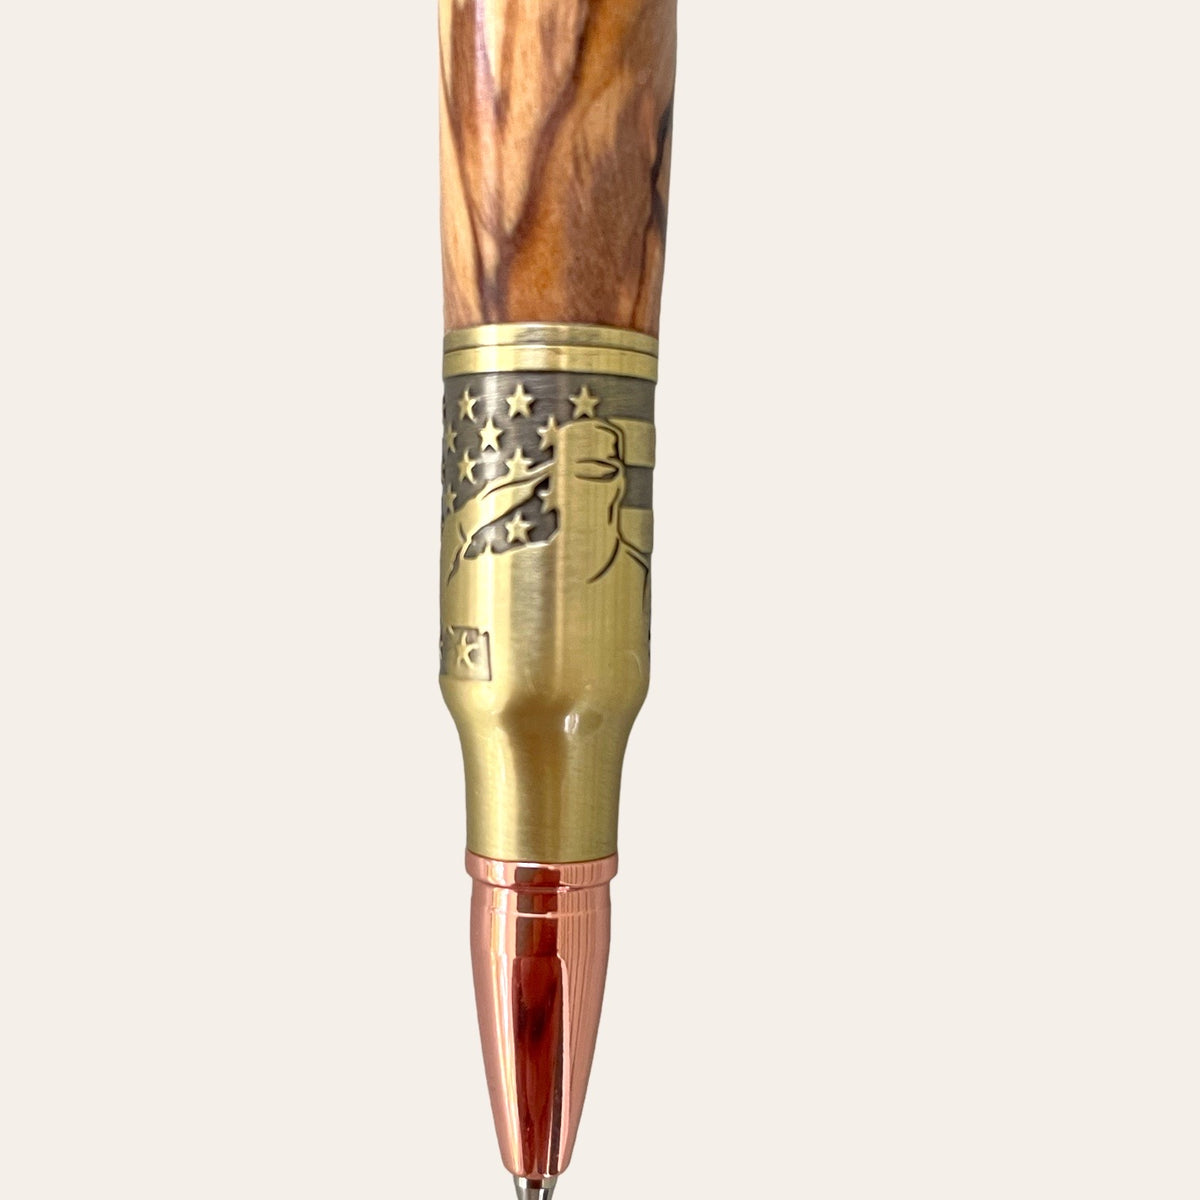 serviceman design on the nib of the Salute The Troops Bolt Action Hand Turned Pen with Bethlehem Olive Wood Pens  Paul's Hand Turned Creations